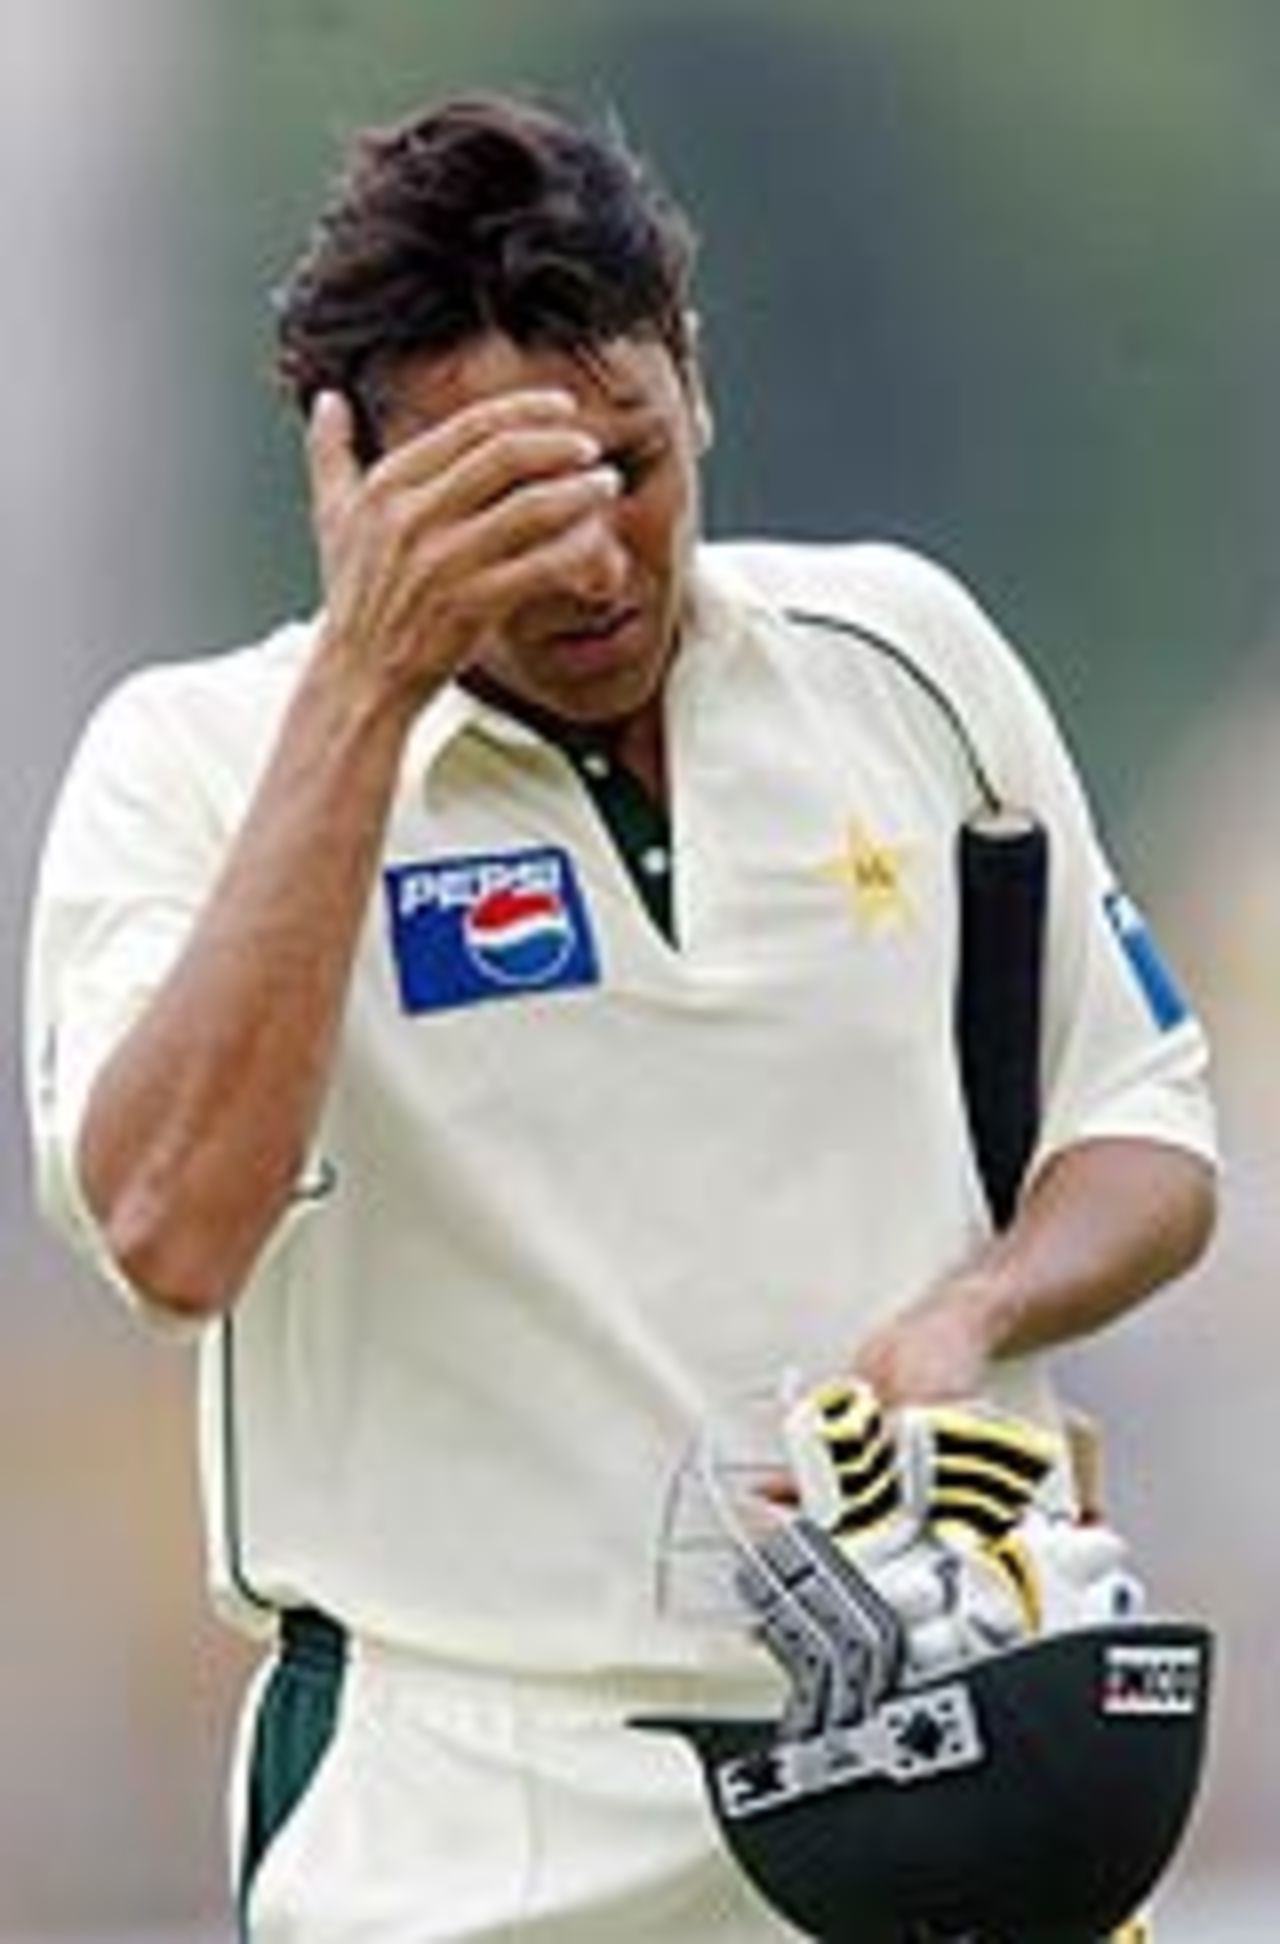 Younis Khan disappointed with his dismissal, India v Pakistan, 2nd Test, Kolkata, March 18, 2005